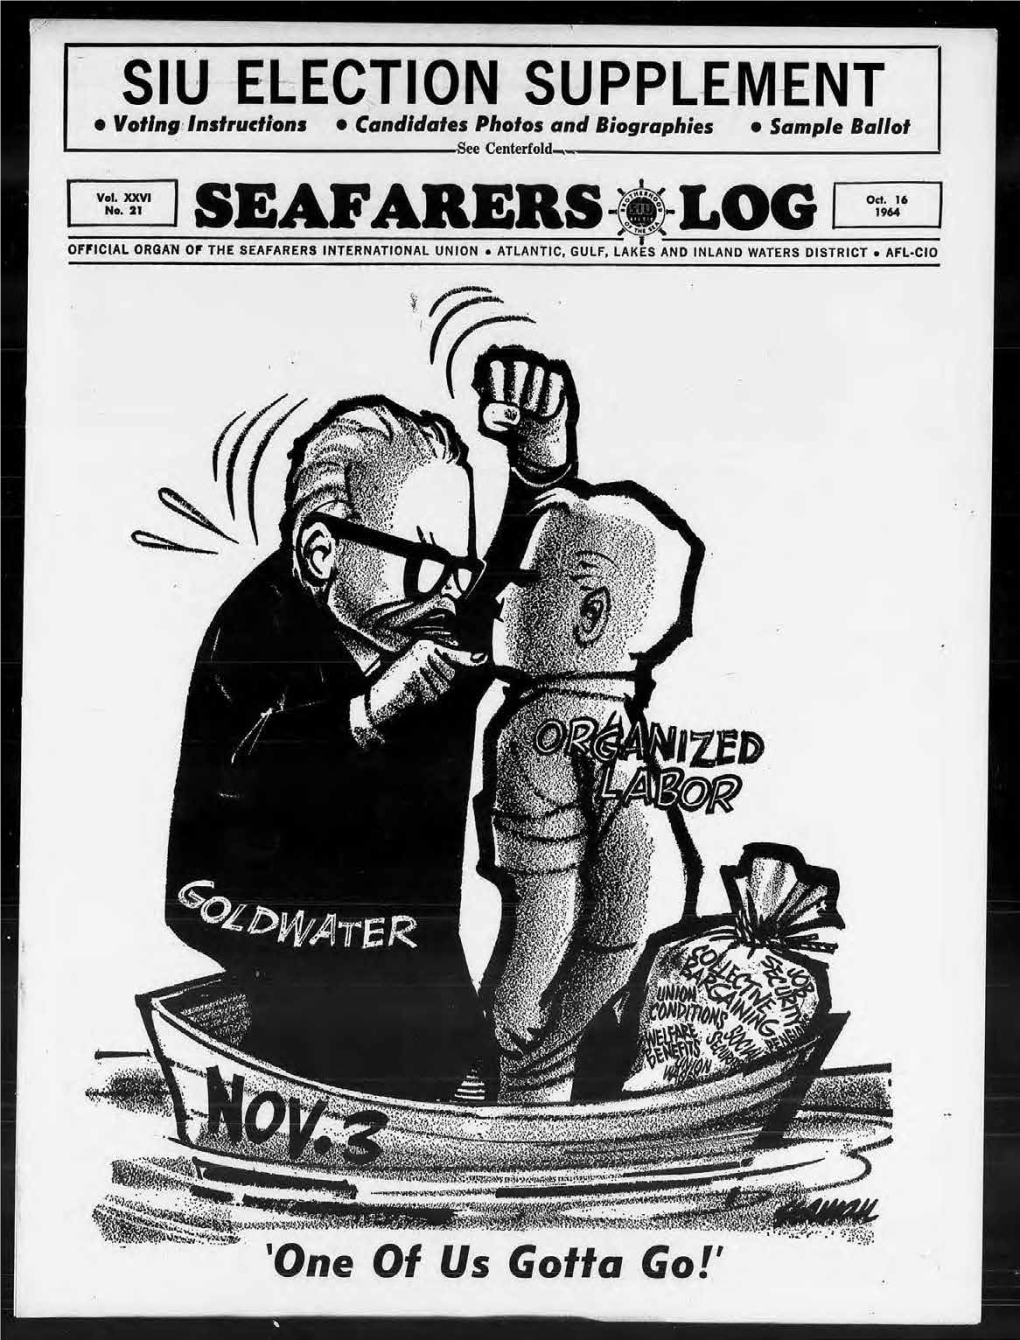 Seafarers Log 1964 Official Organ of the Seafarers International Union • Atlantic, Gulf, Lakes and Inland Waters District • Afl-Cio